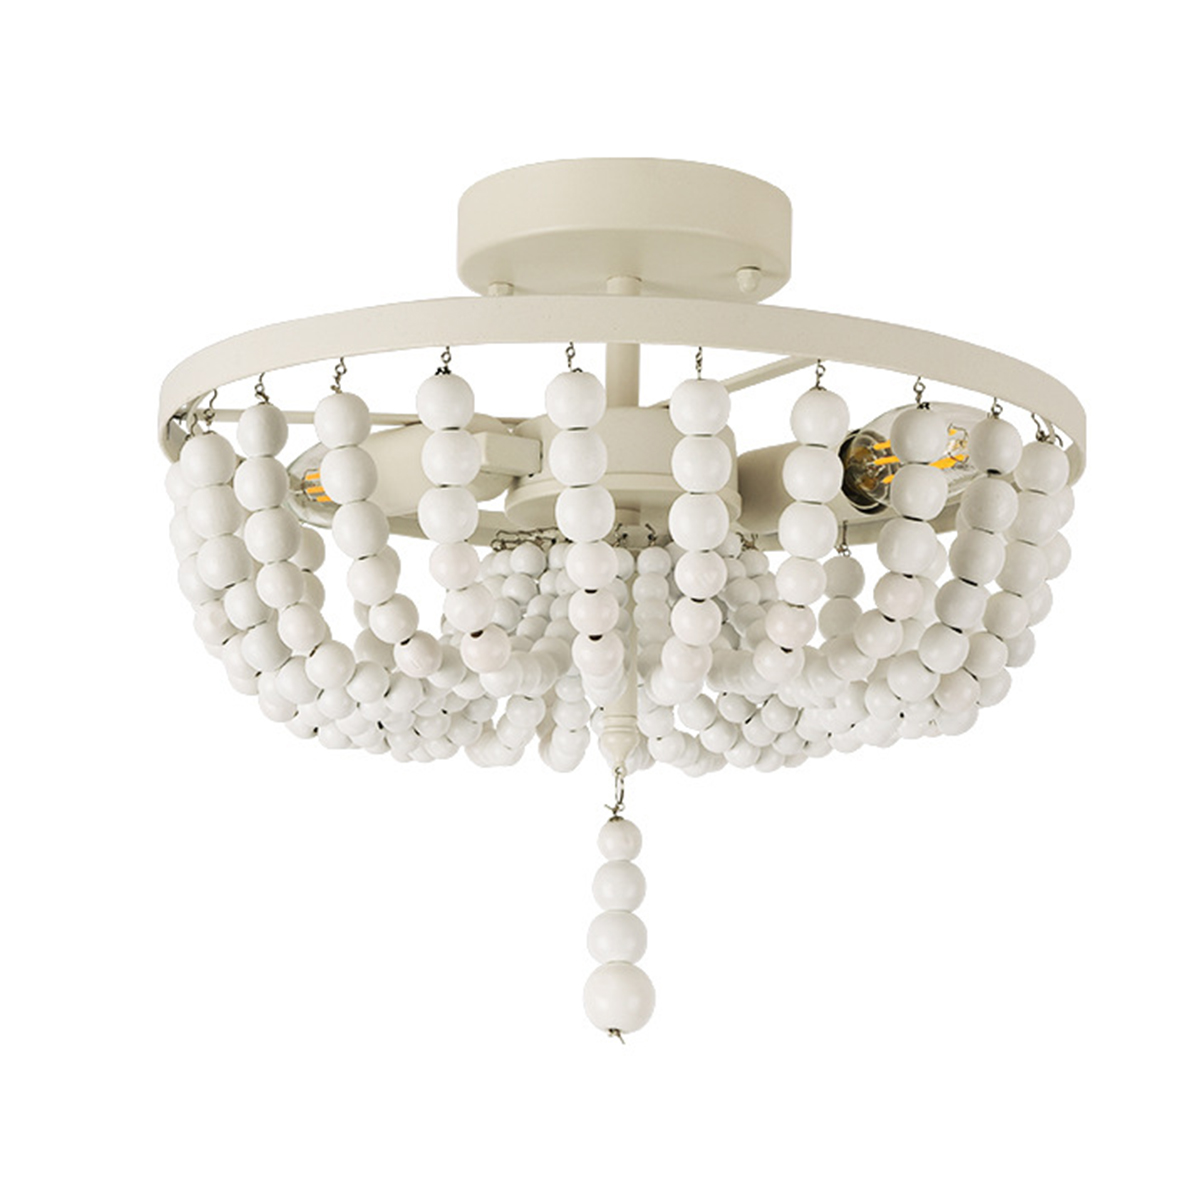 Wooden-Bead-Chandelier-Lighting-Fixture-Retro-Wood-Ceiling-Pendant-Light-White-Without-Bulbs-1935242-9